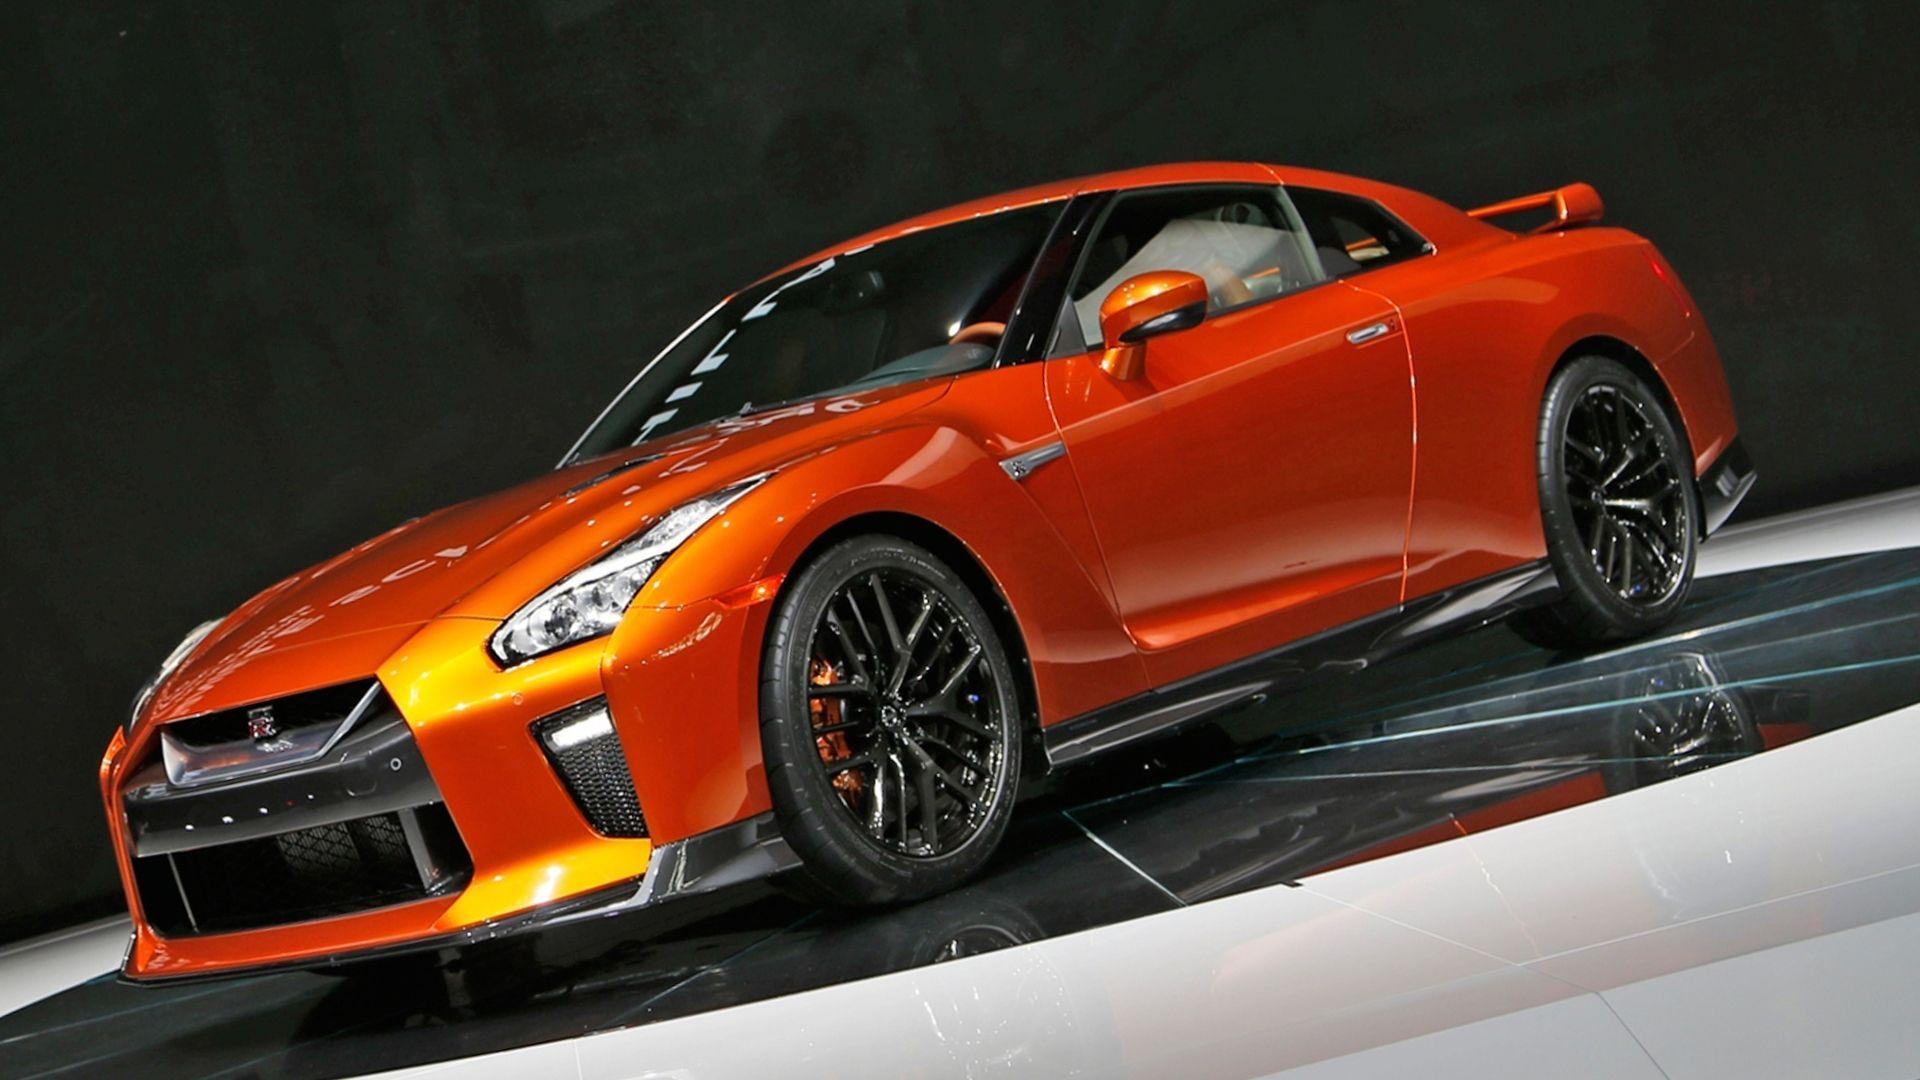 The 2019 Nissan Gtr WallpaperCar And Vehicle Review, Car